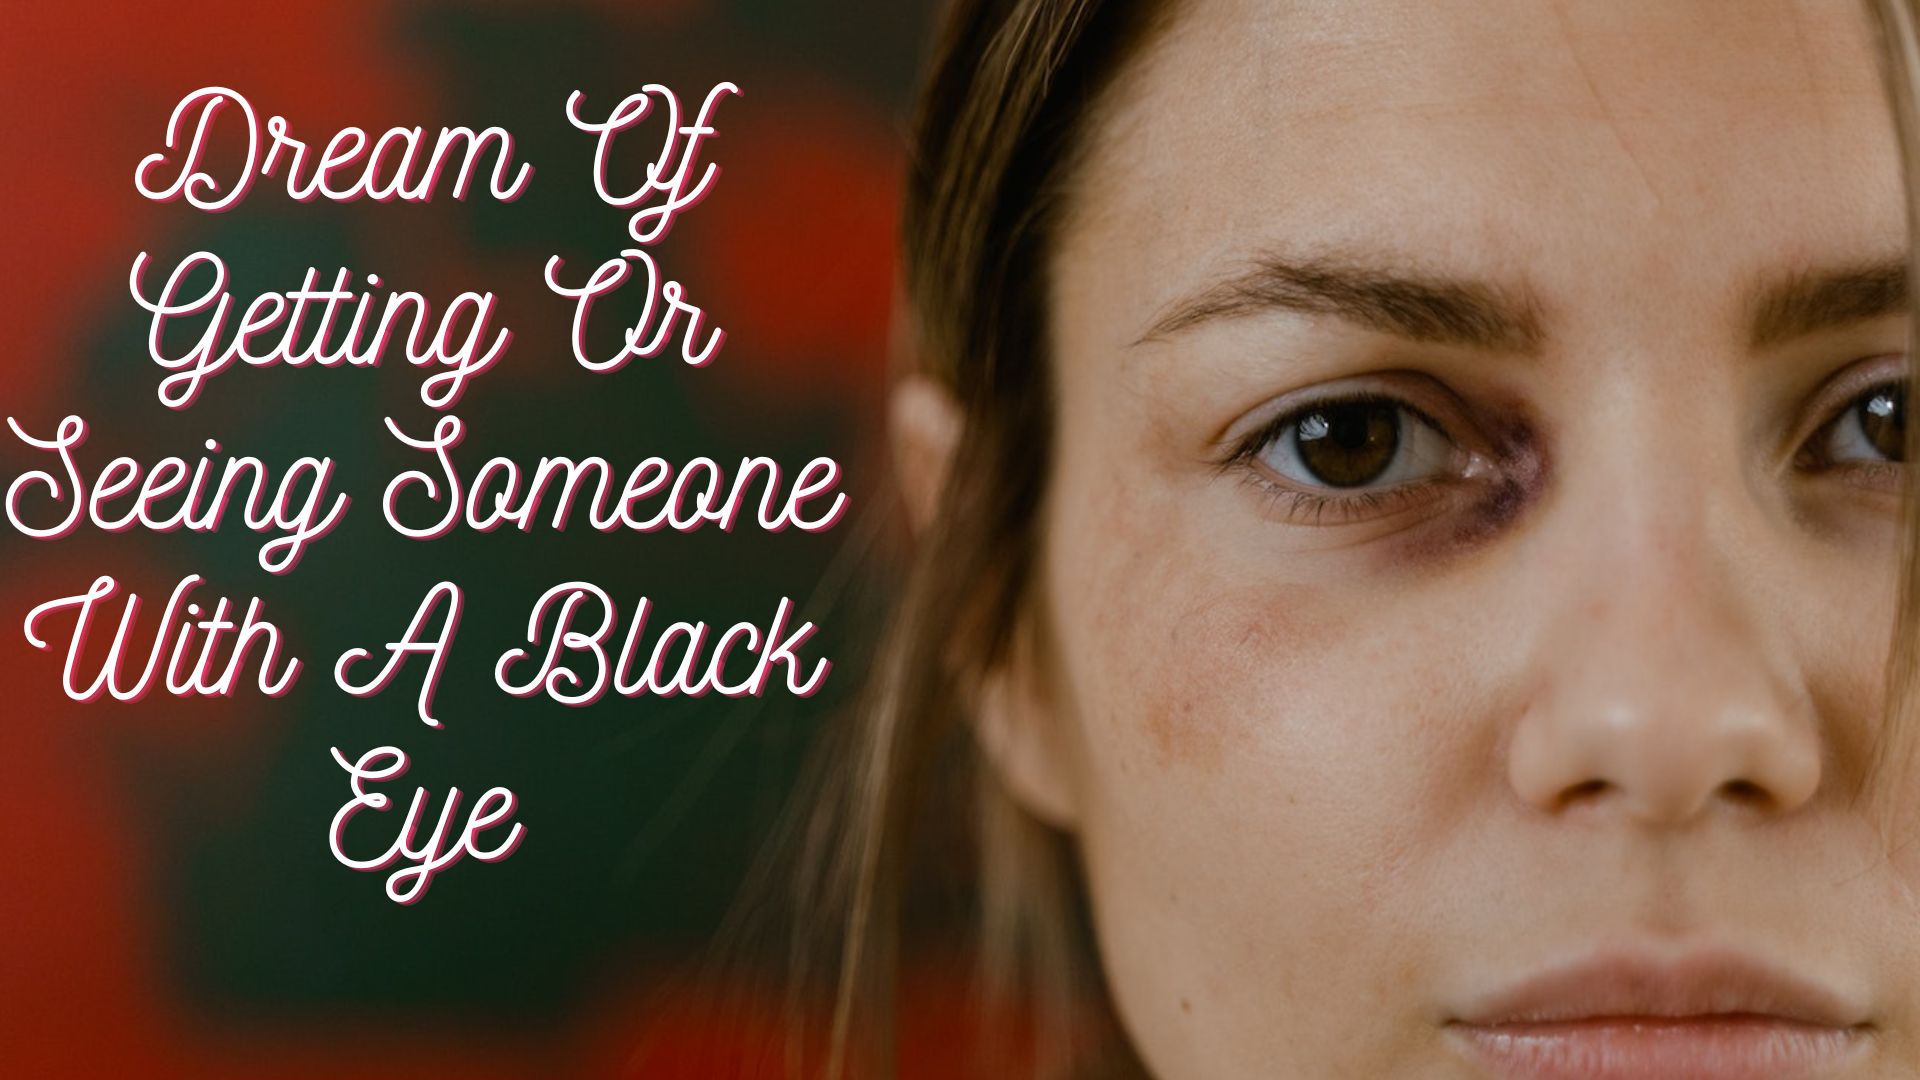 Dream Of Getting Or Seeing Someone With A Black Eye - Signifies Death